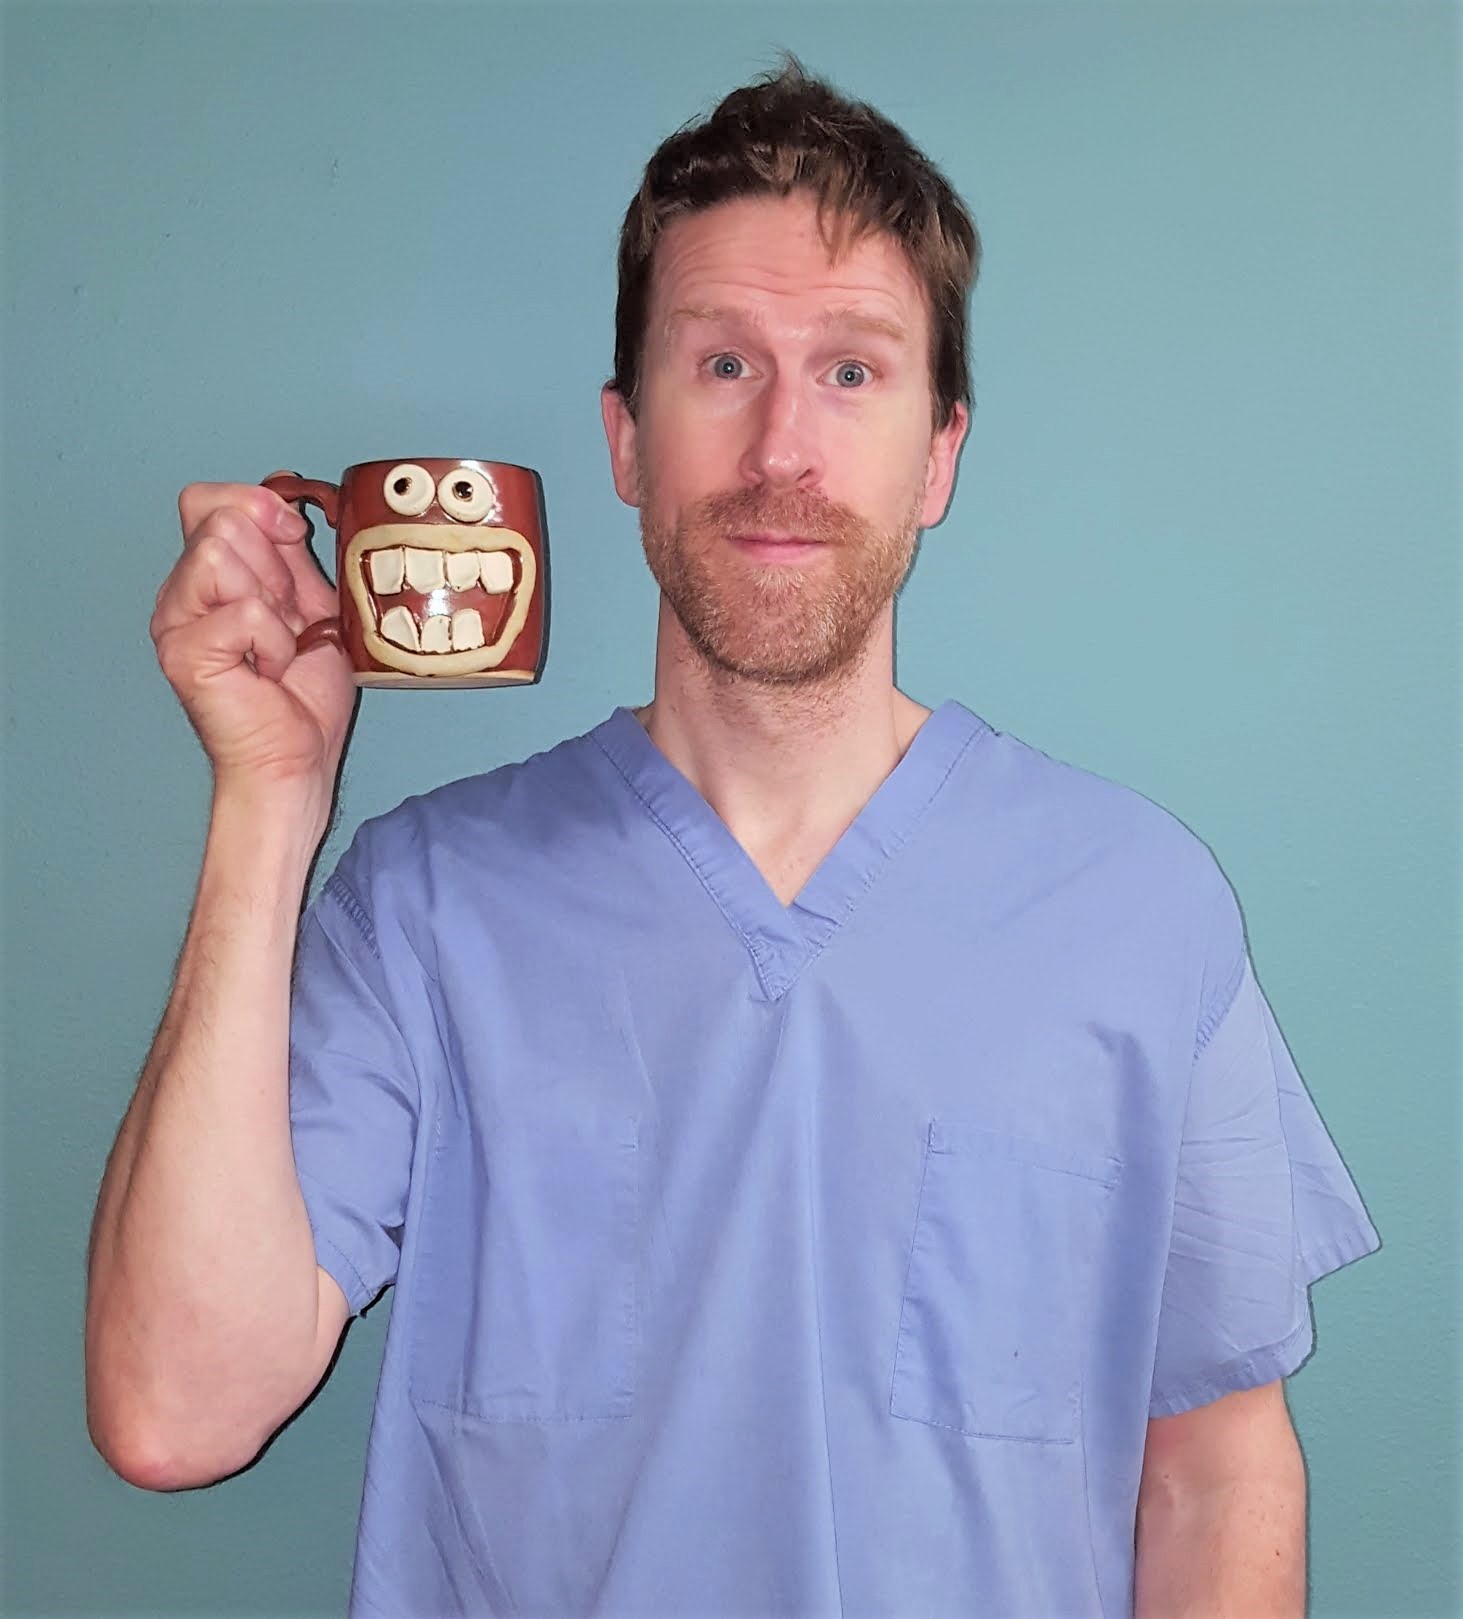 Dr. Watson standing with a mug in his hand